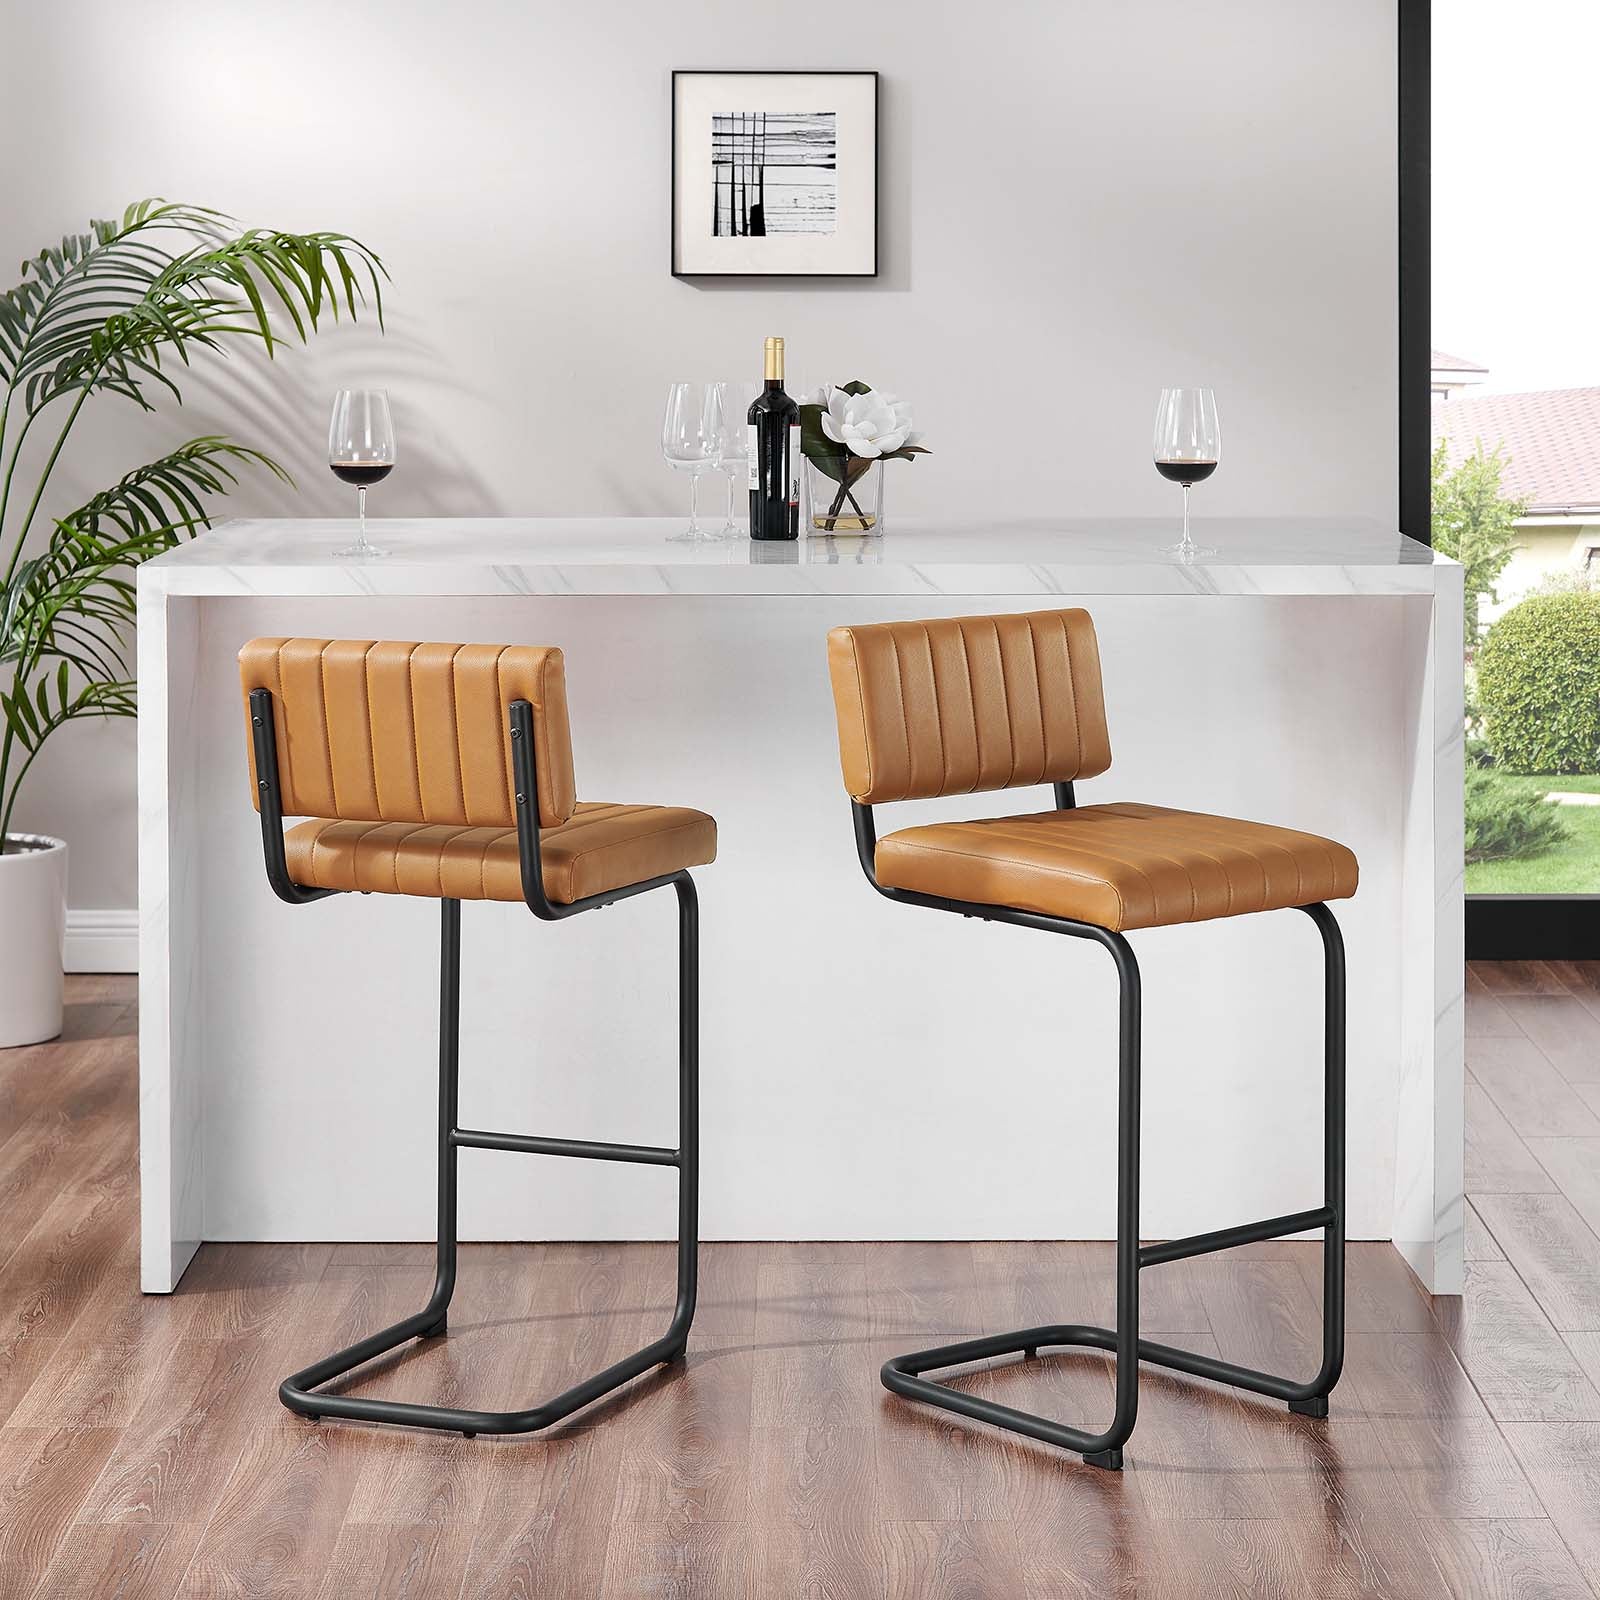 Parity Vegan Leather Counter Stools - Set of 2 - East Shore Modern Home Furnishings